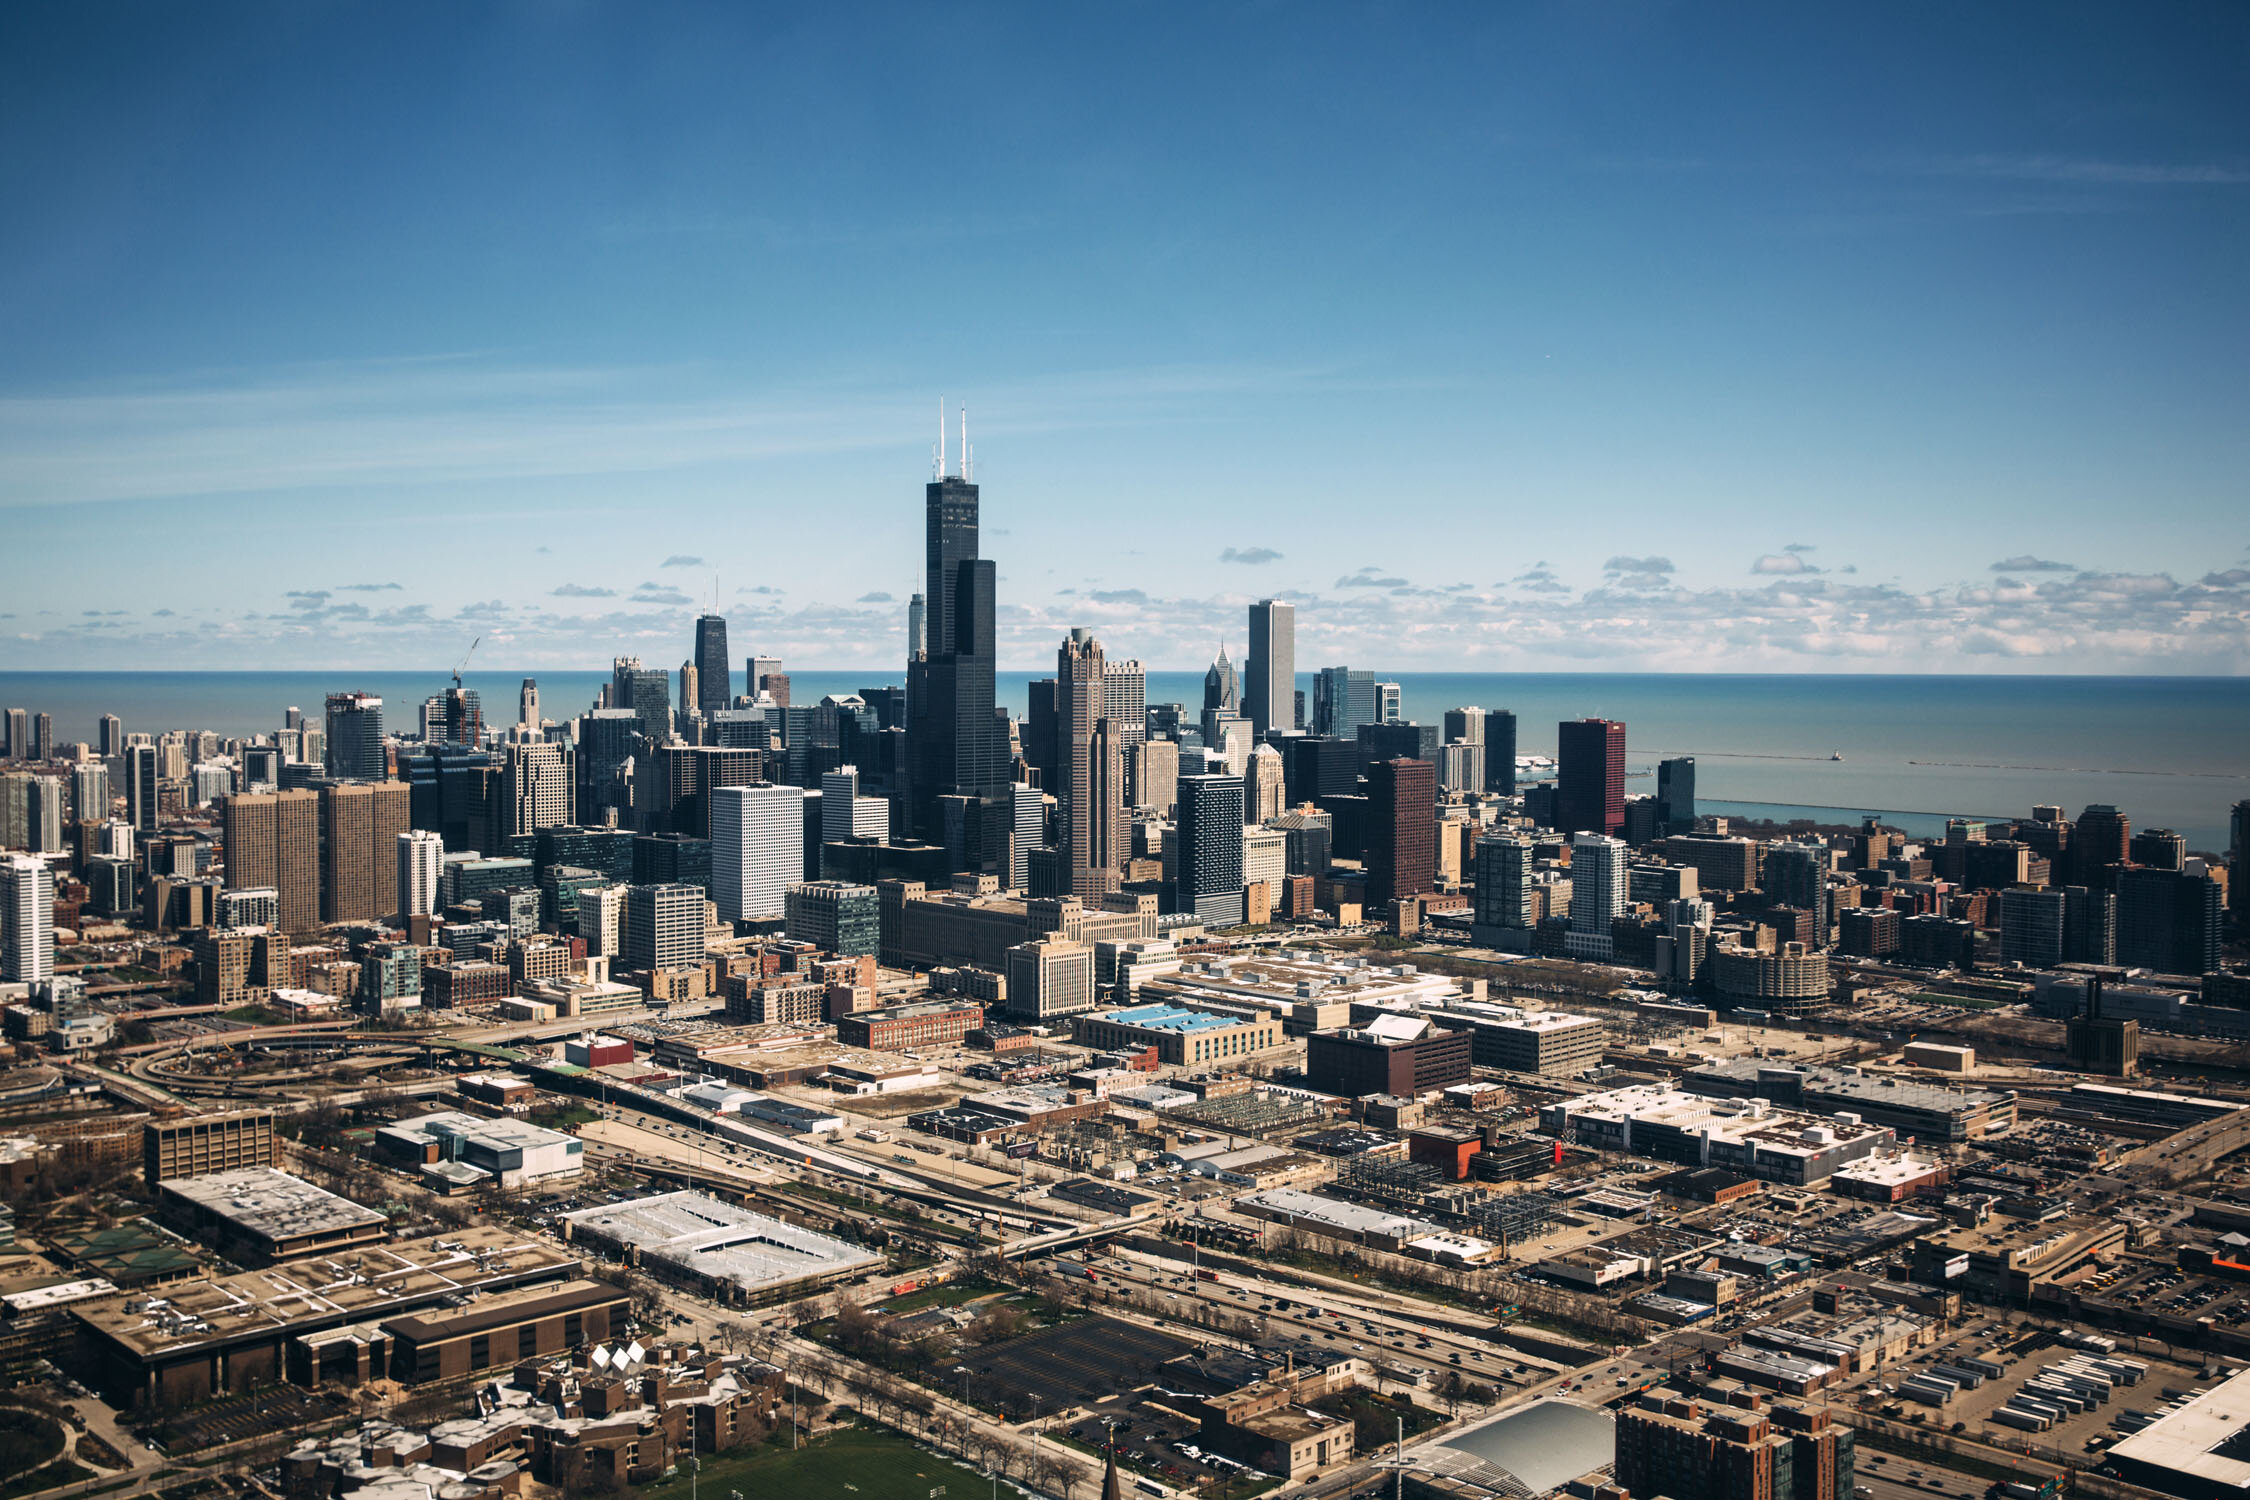 Chicago_WSJ_HELICOPTER_Schuh_0050.jpg